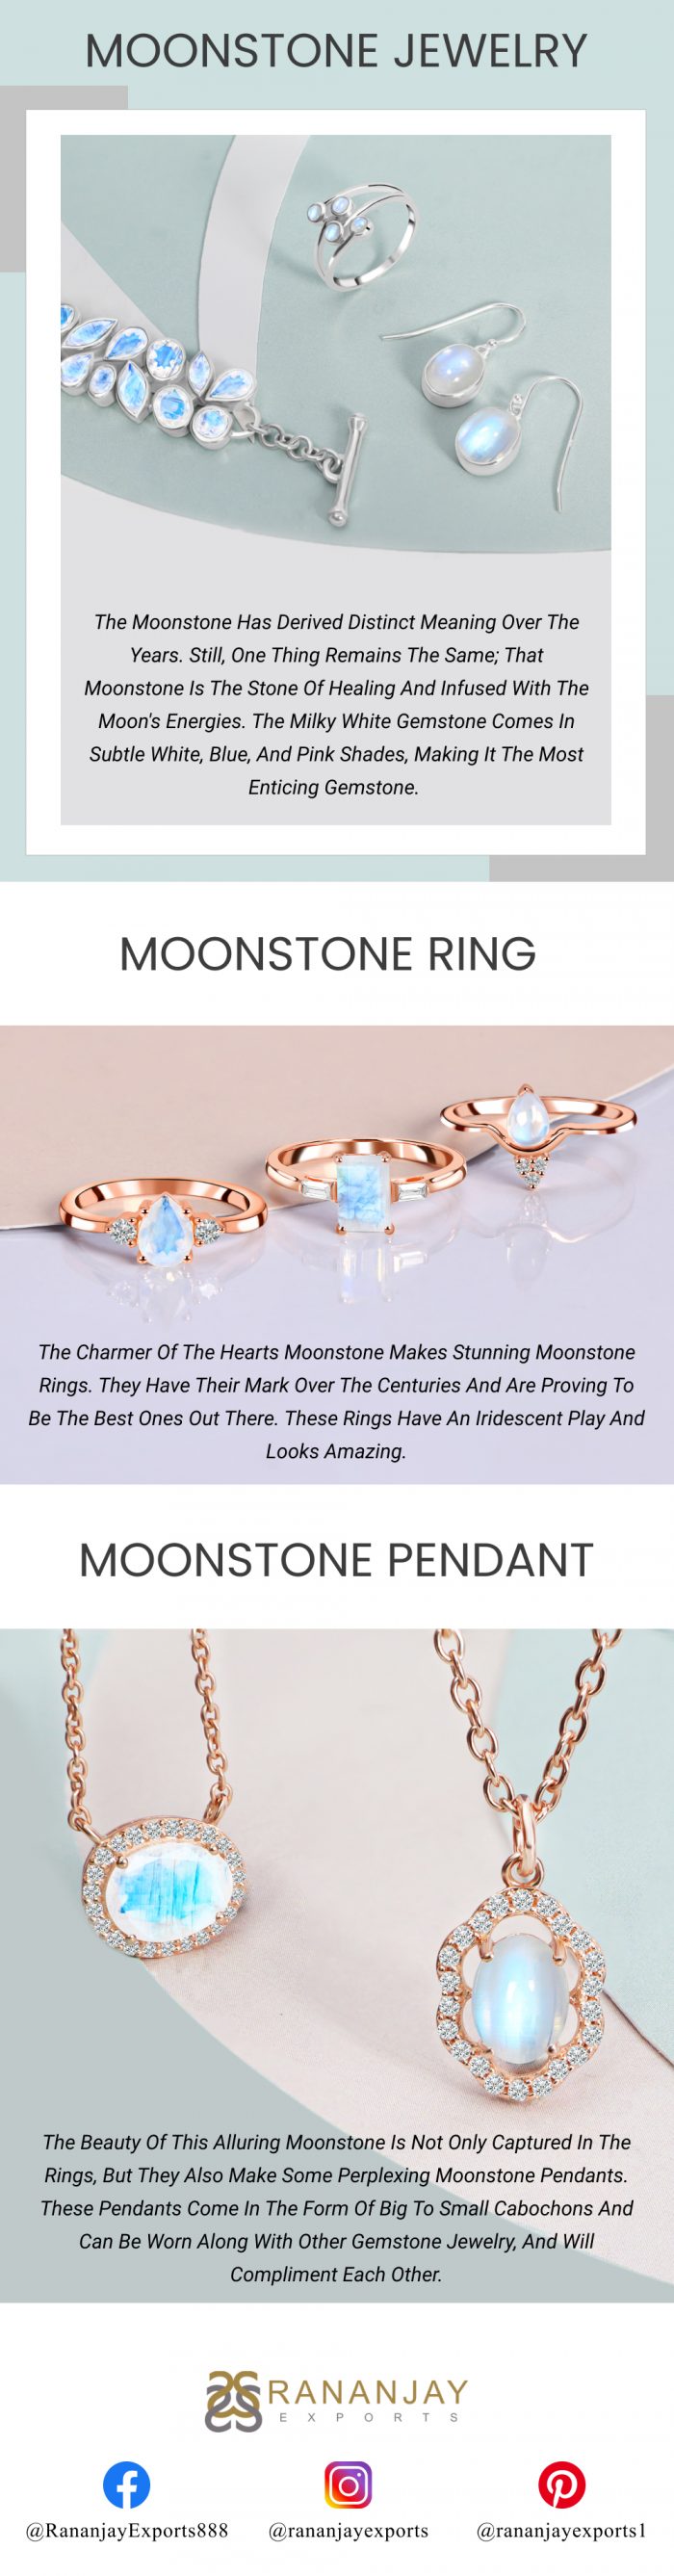 Buy Moonstone Jewelry Online in Wholesale Price at Rananjay Exports